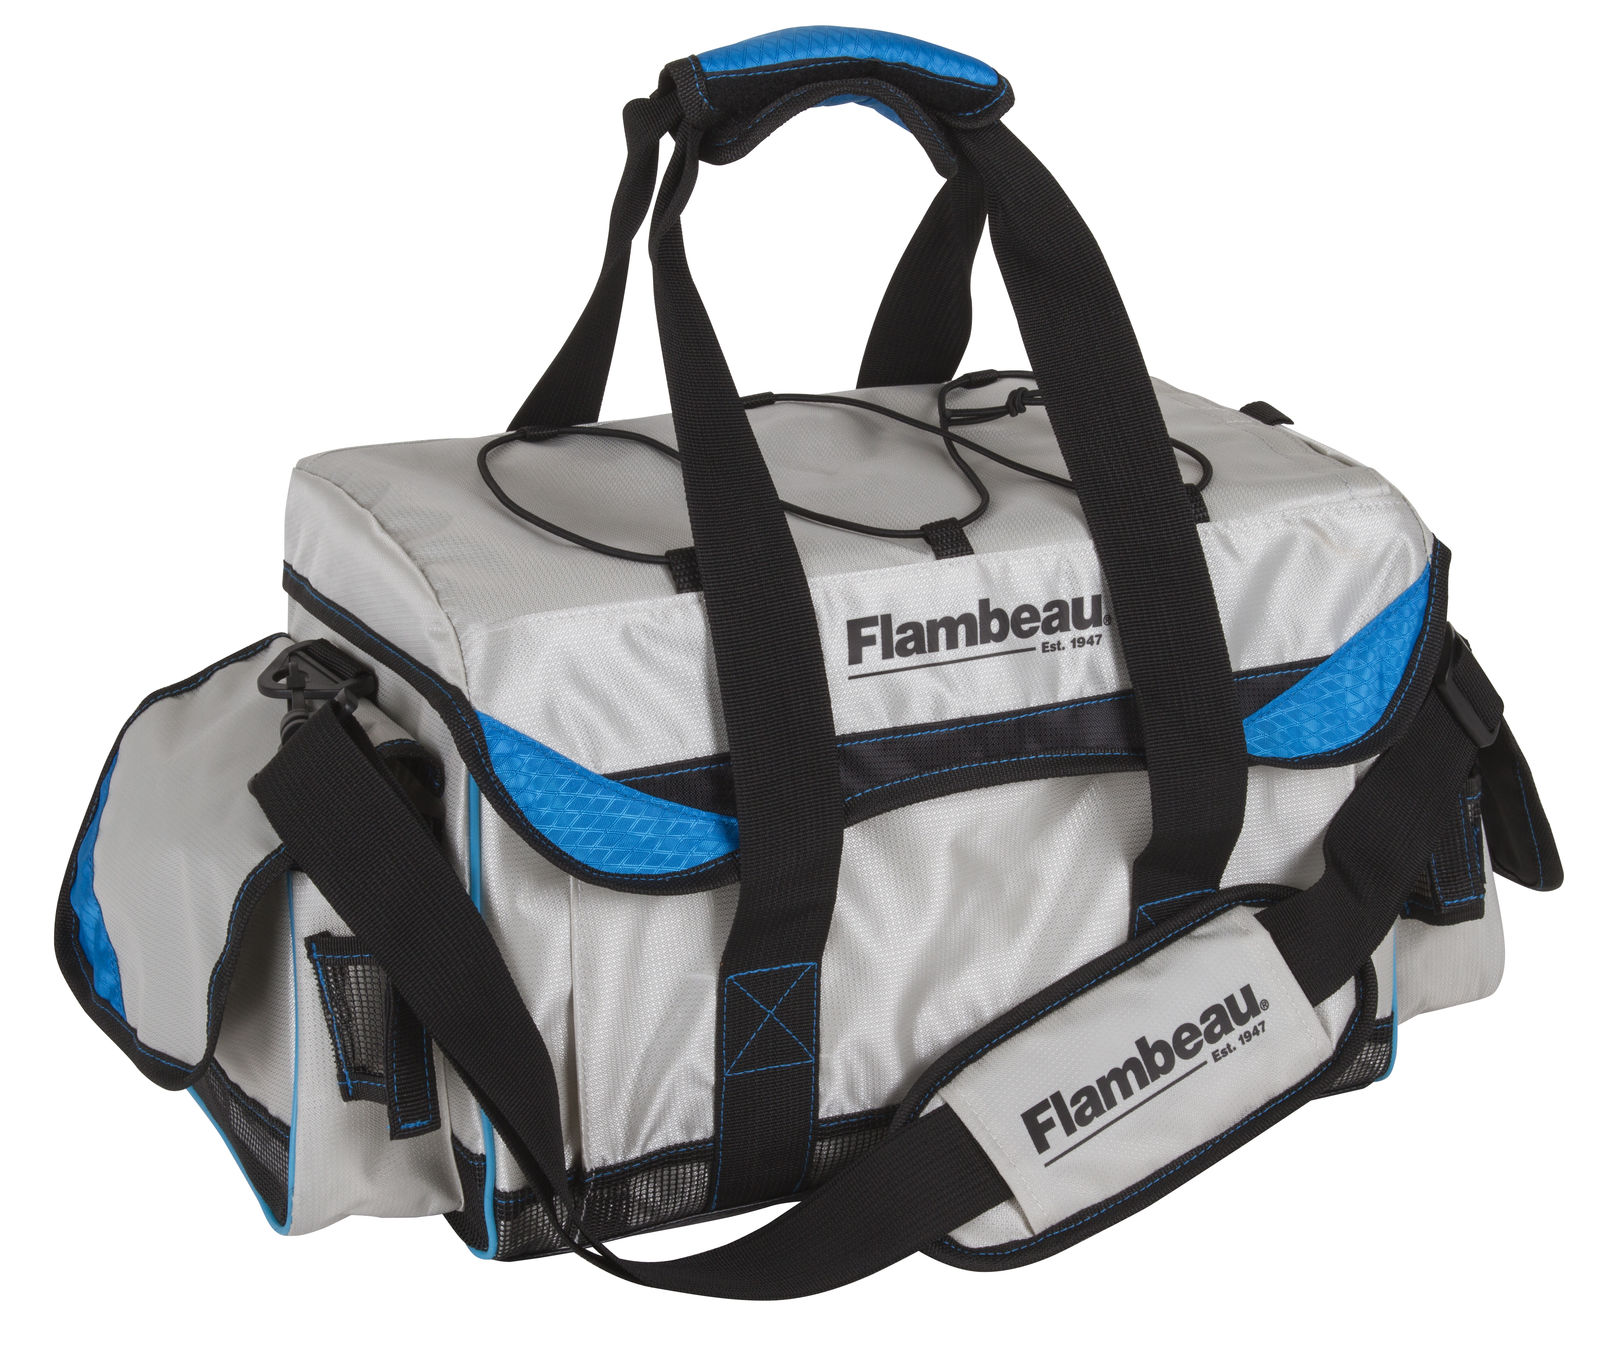 Atlantic Tackle - New in stock from Flambeau! The roomy